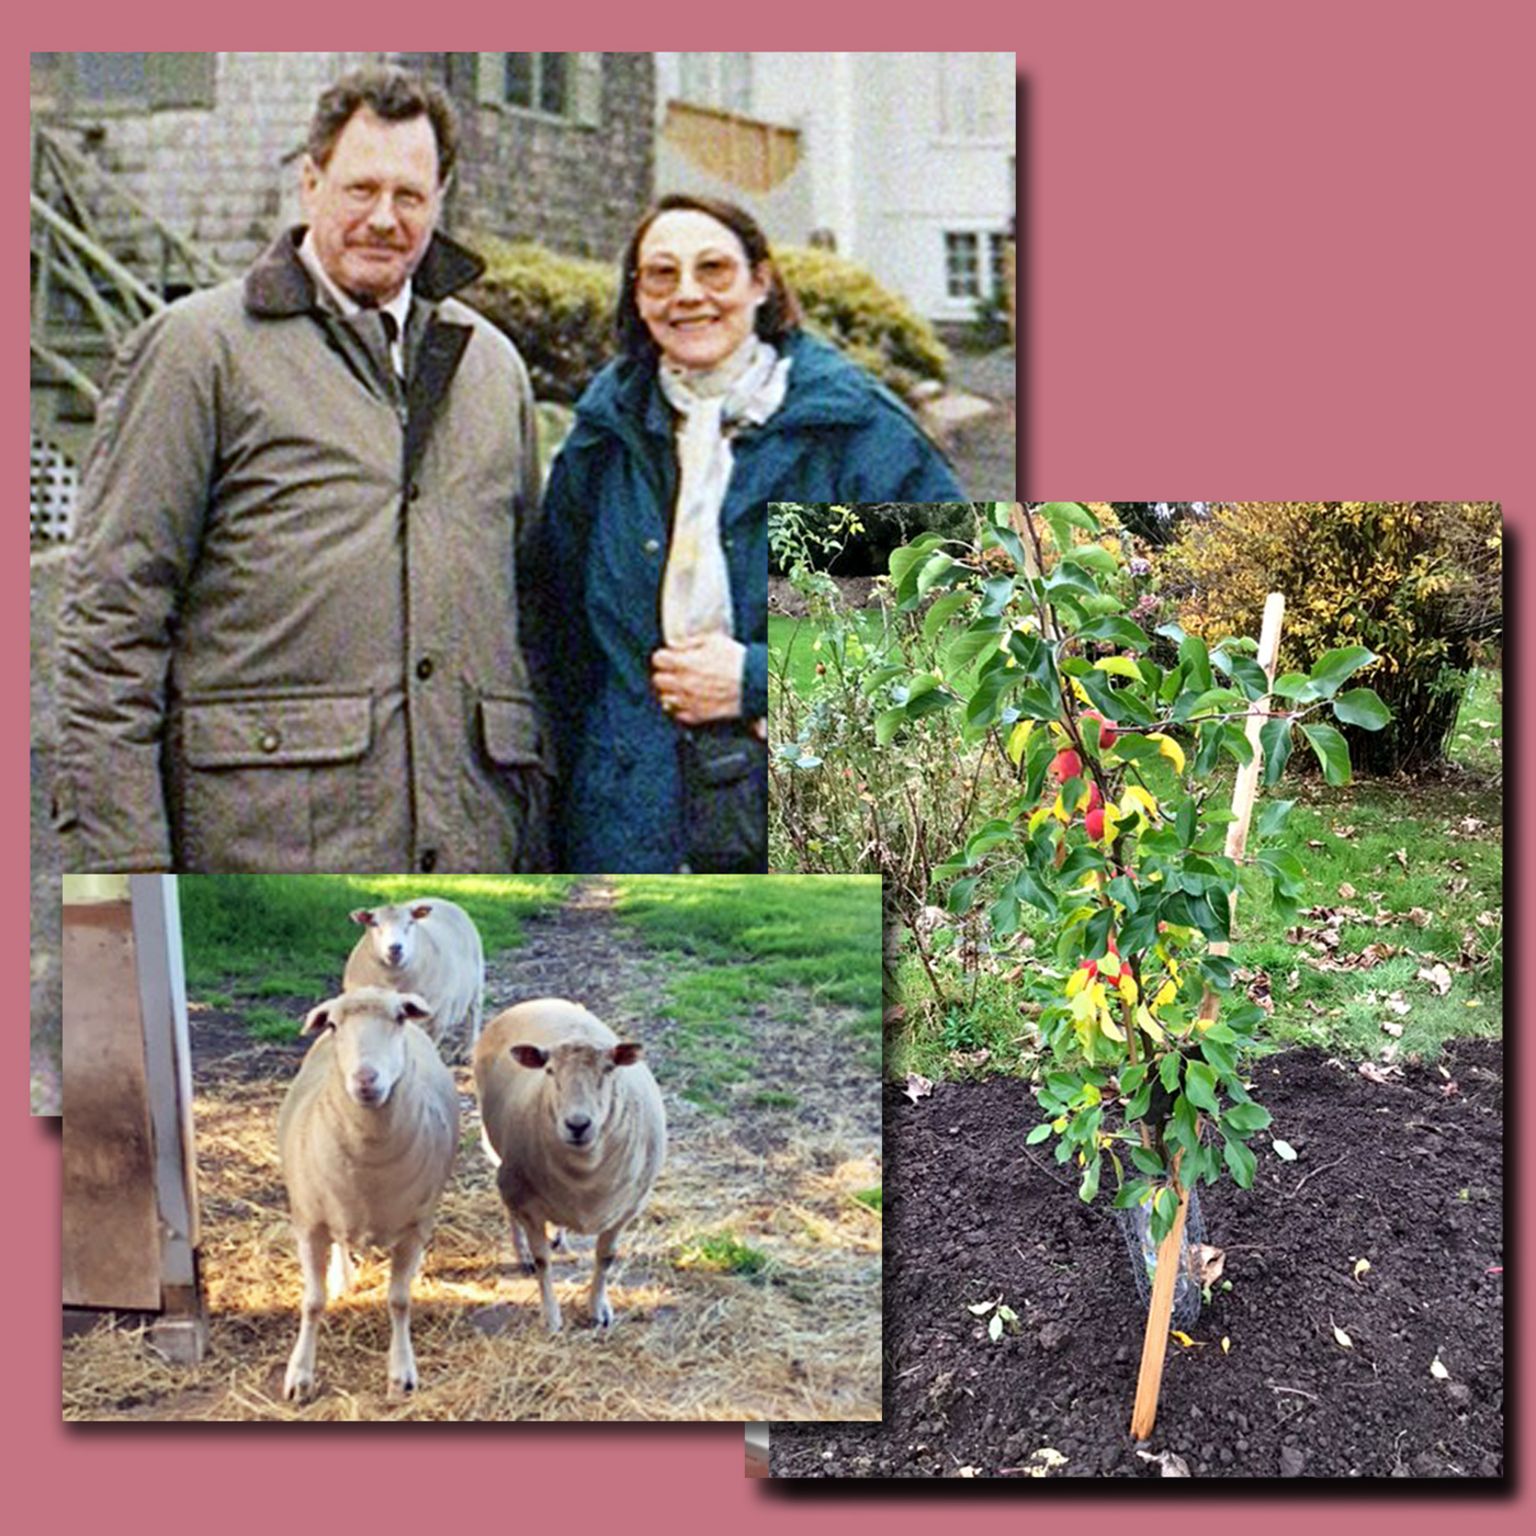 John and Denise in 2000, their sheep and the crab apple tree